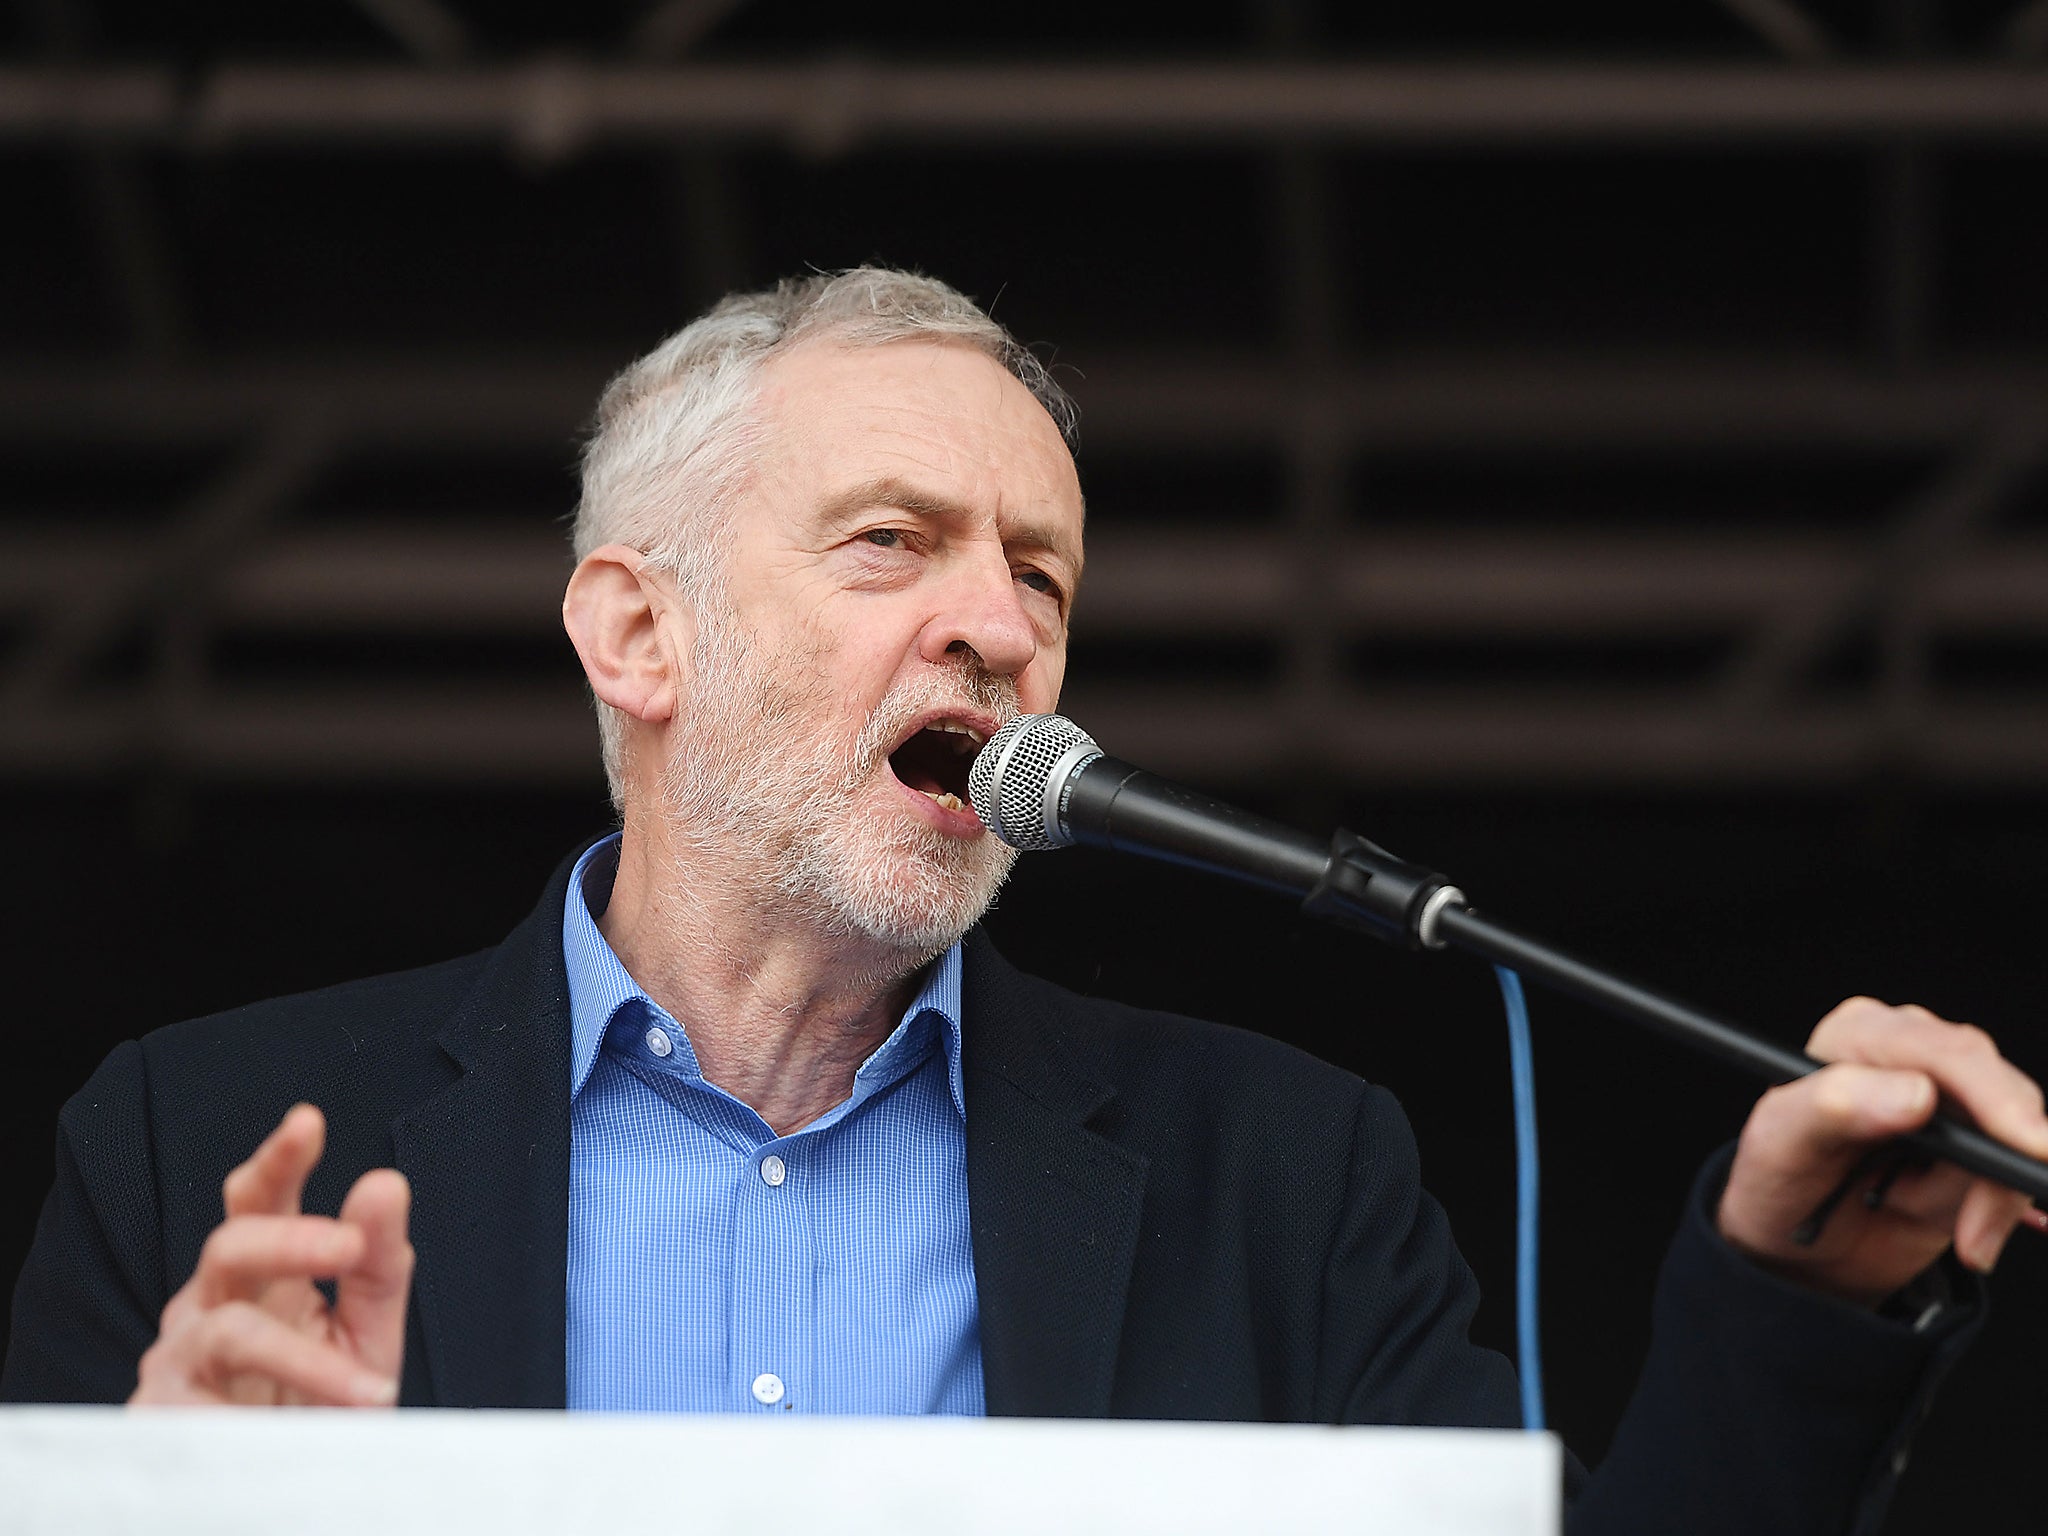 Labour leader Jeremy Corbyn speaking at a rally in central London